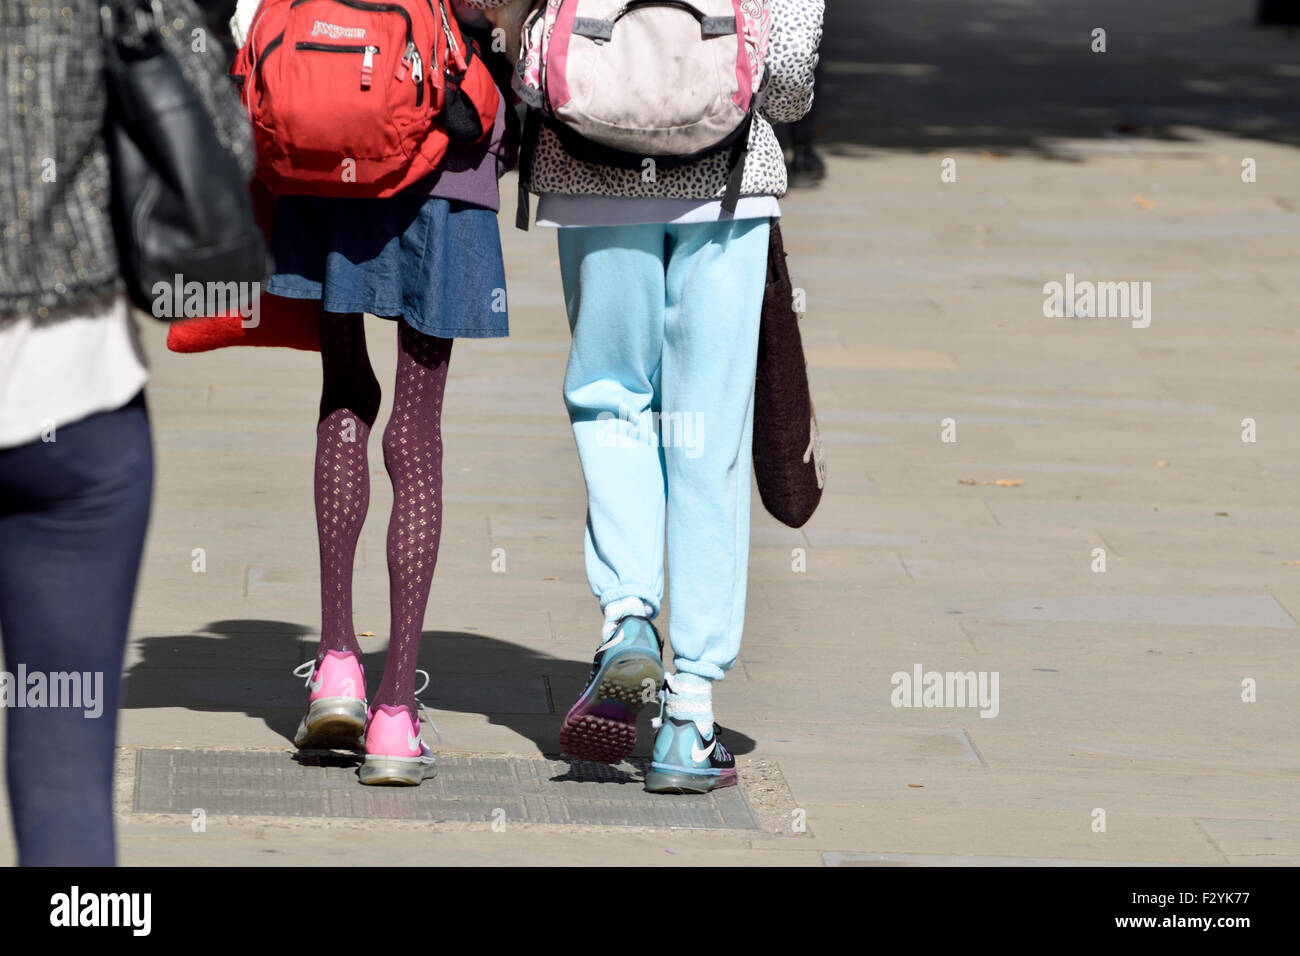 London, England, UK. Woman with very thin legs, walking with a friend Stock Photo